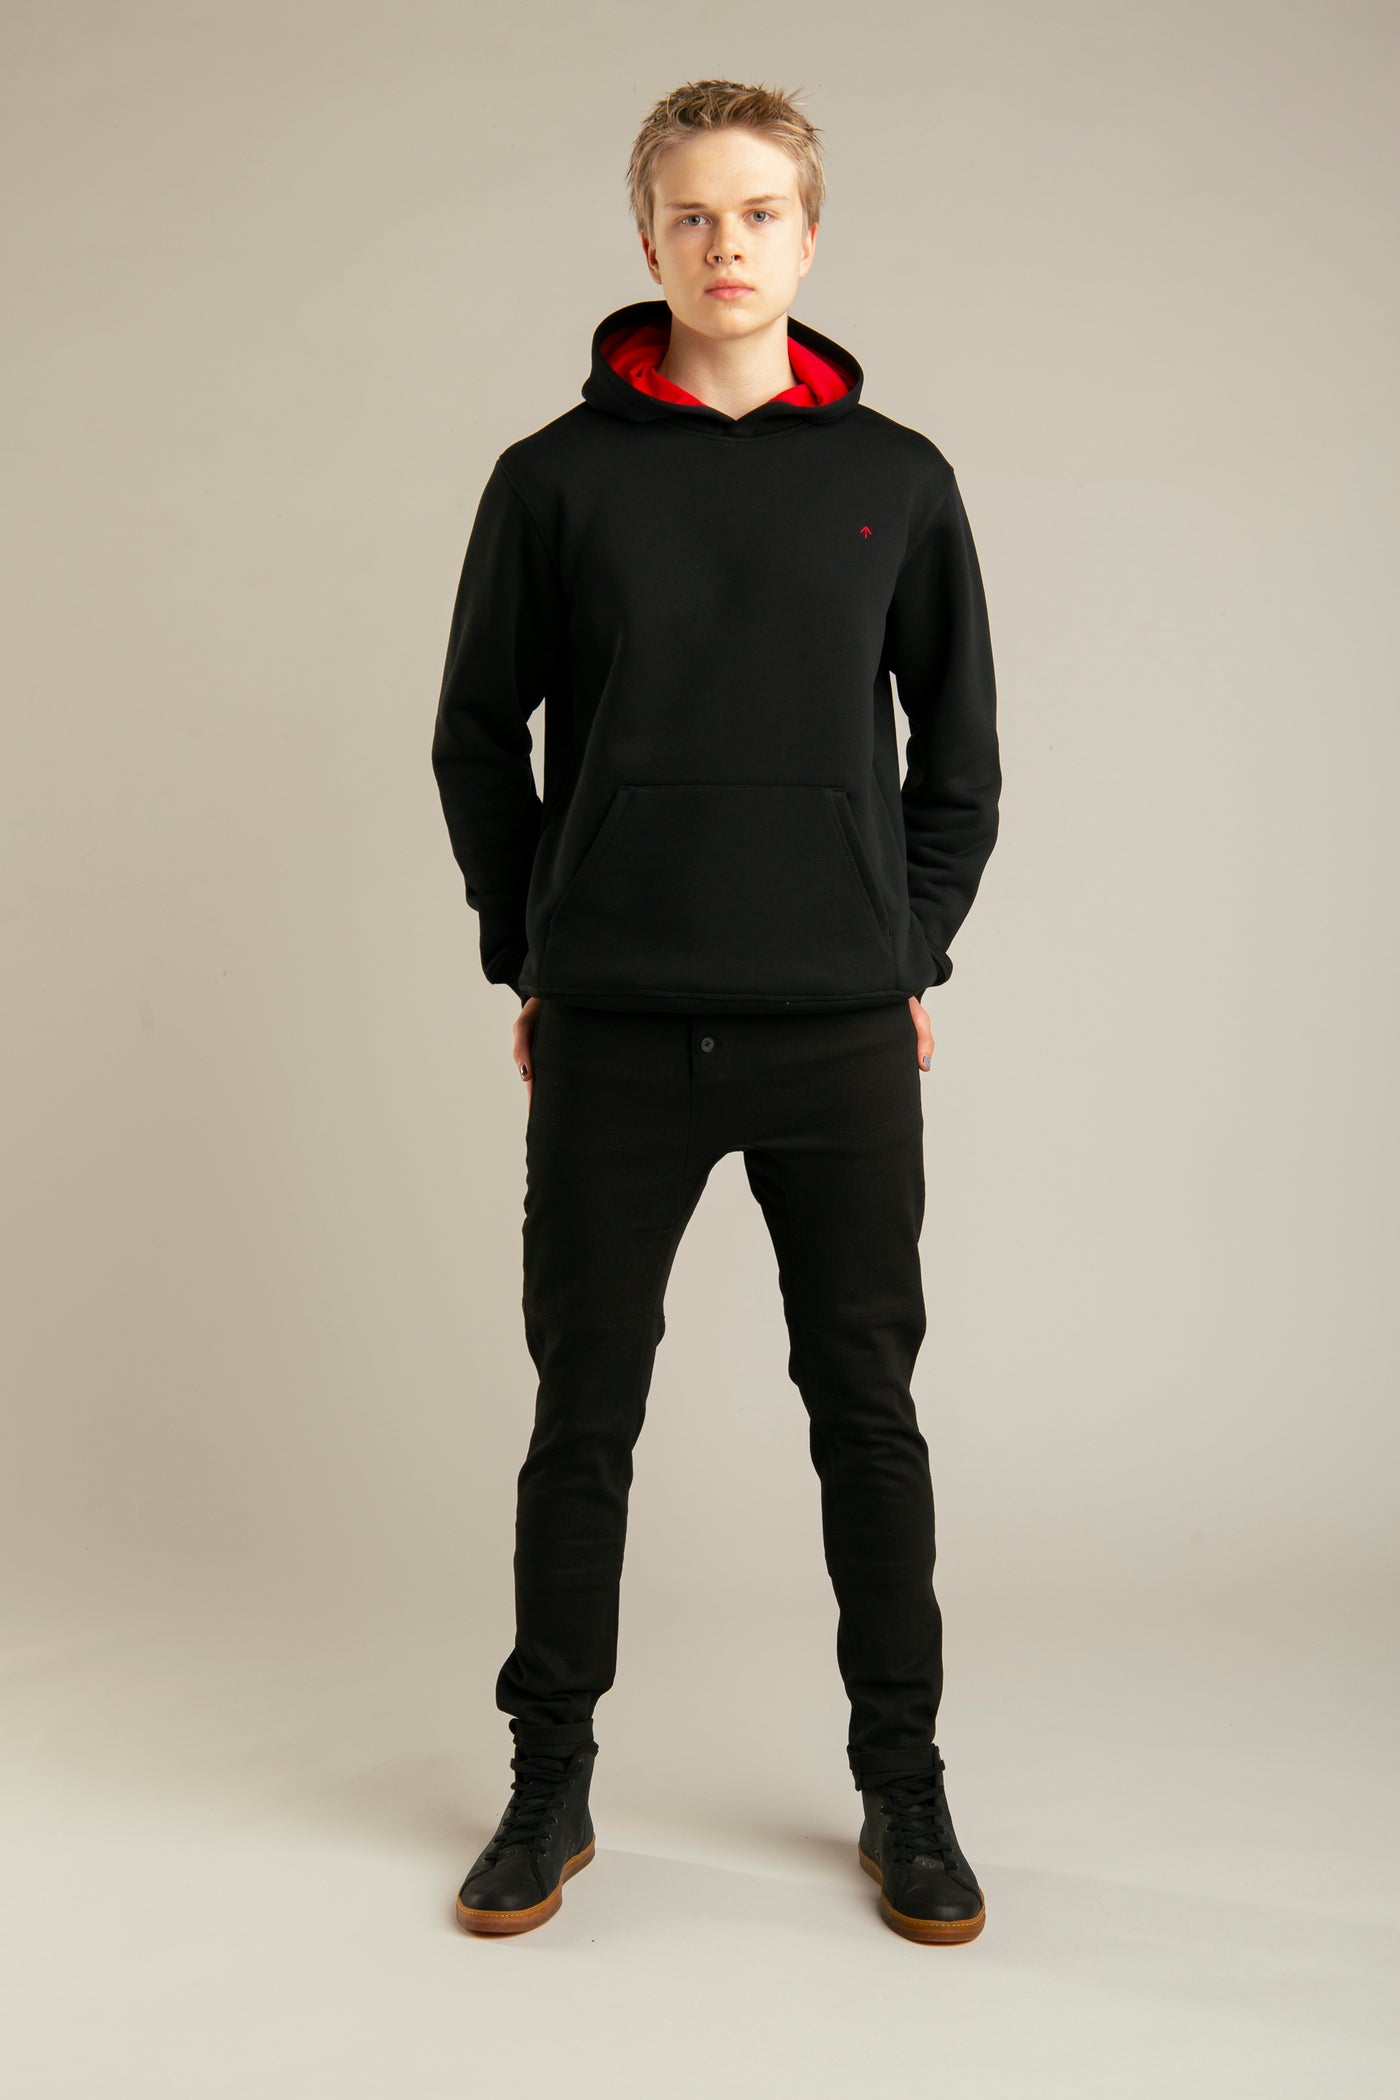 Hoodie with arrow embroidery for men | Black, red